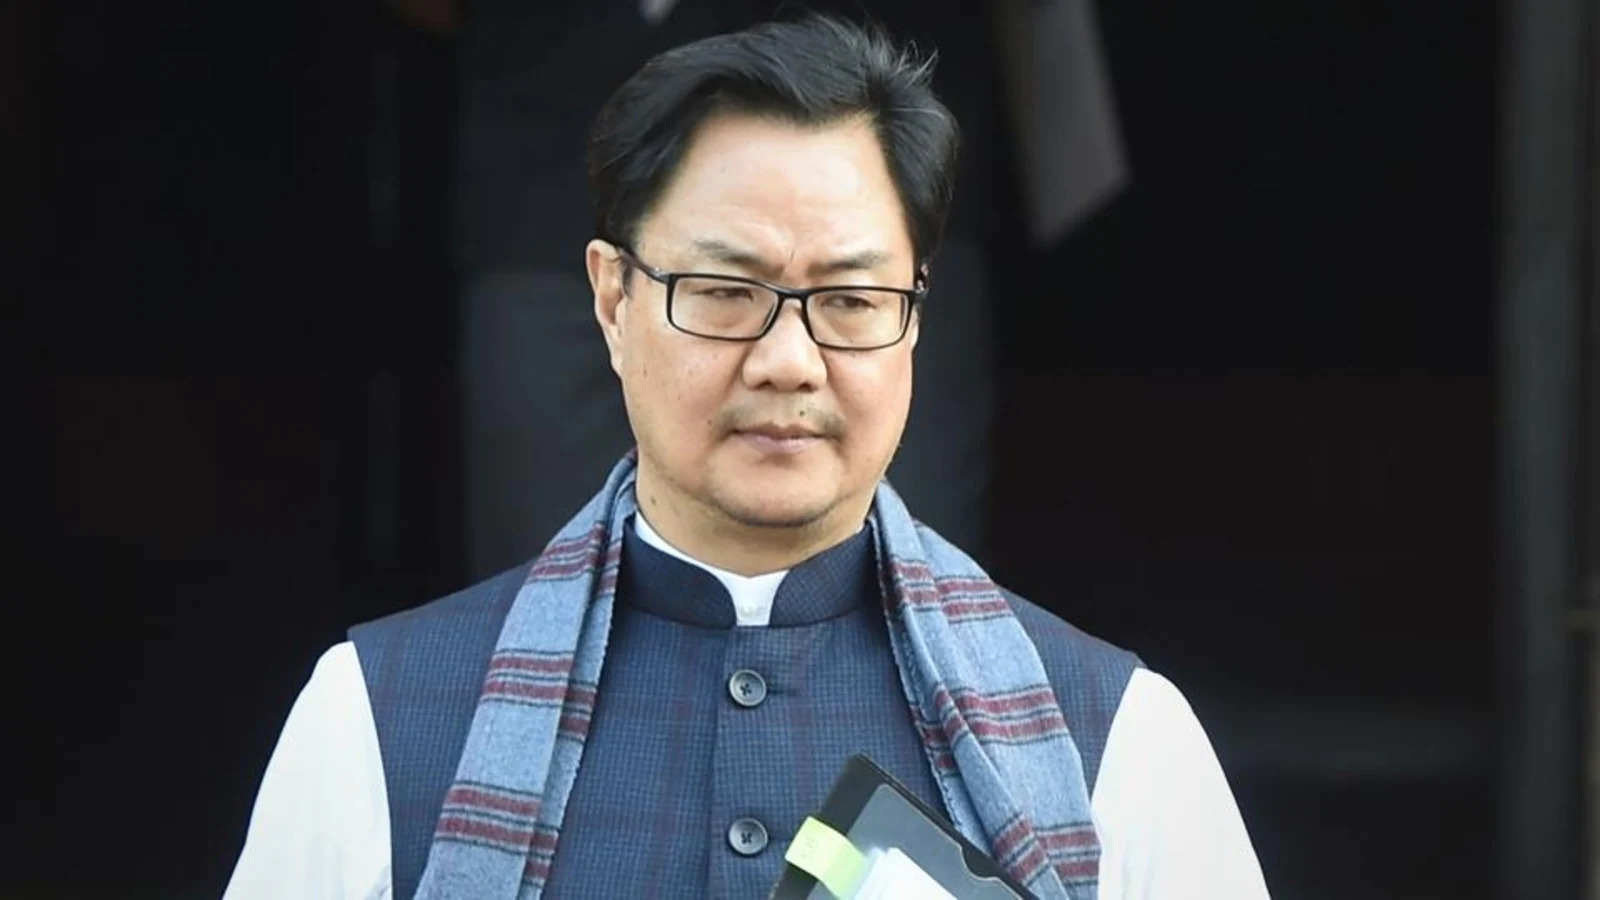 Millets should be included in the G20 Presidency meeting says Kiran Rijiju